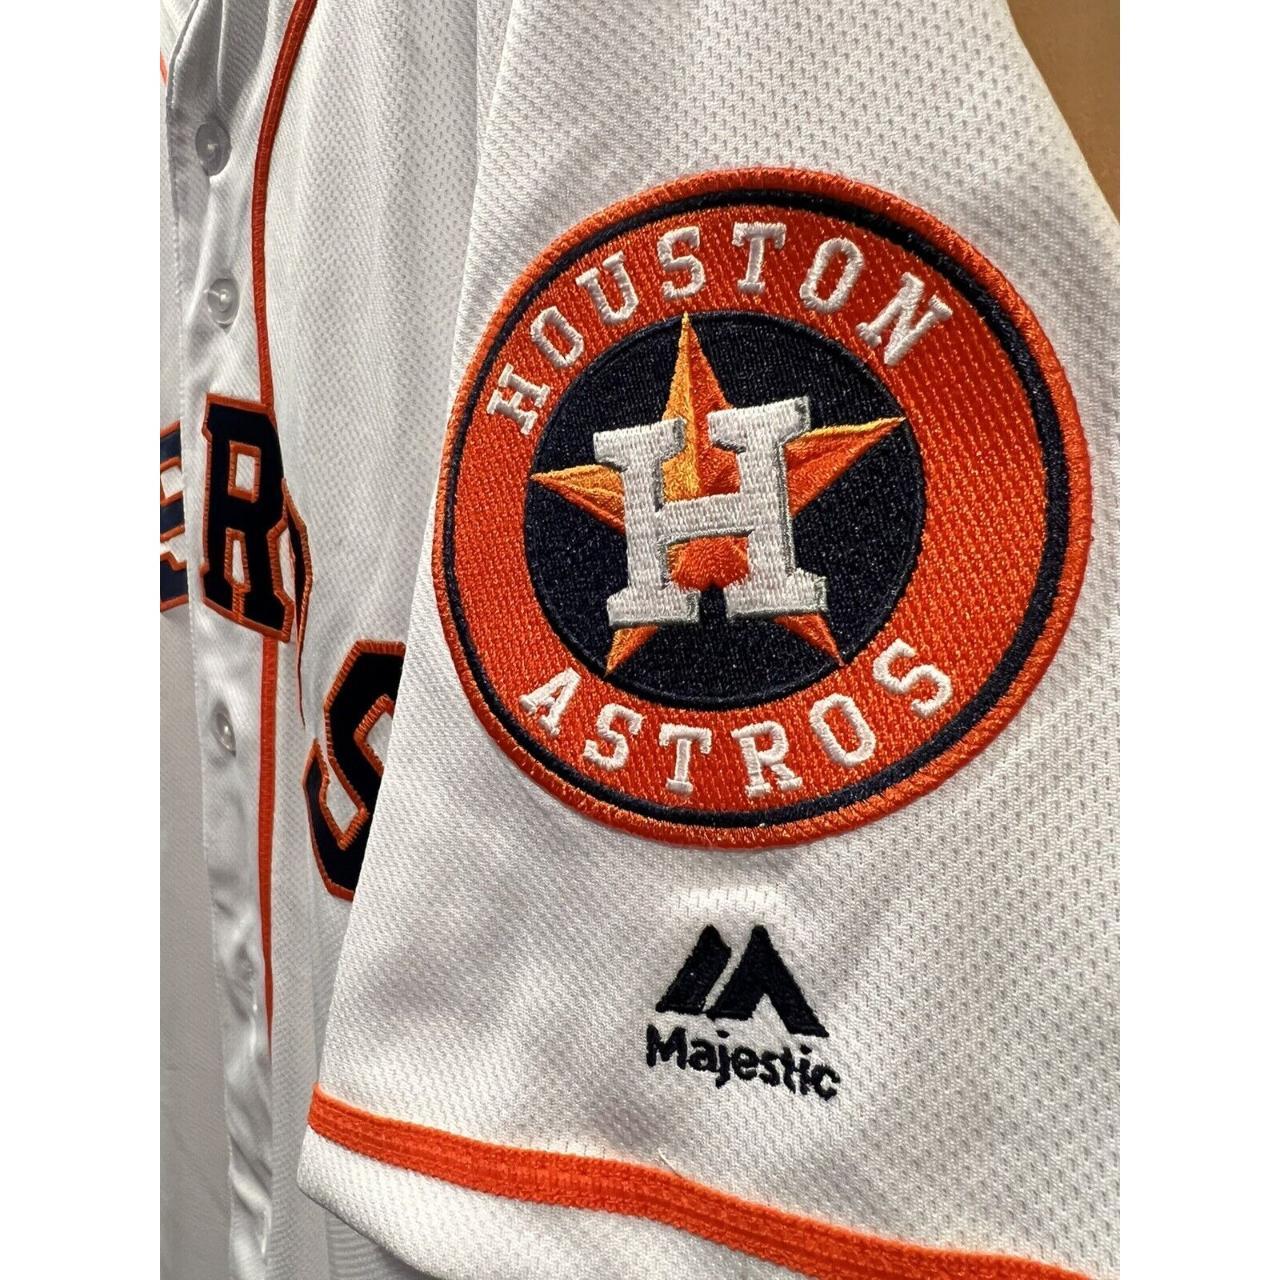 Mens MLB Houston Astros Authentic On Field Flex Base Jersey - Home